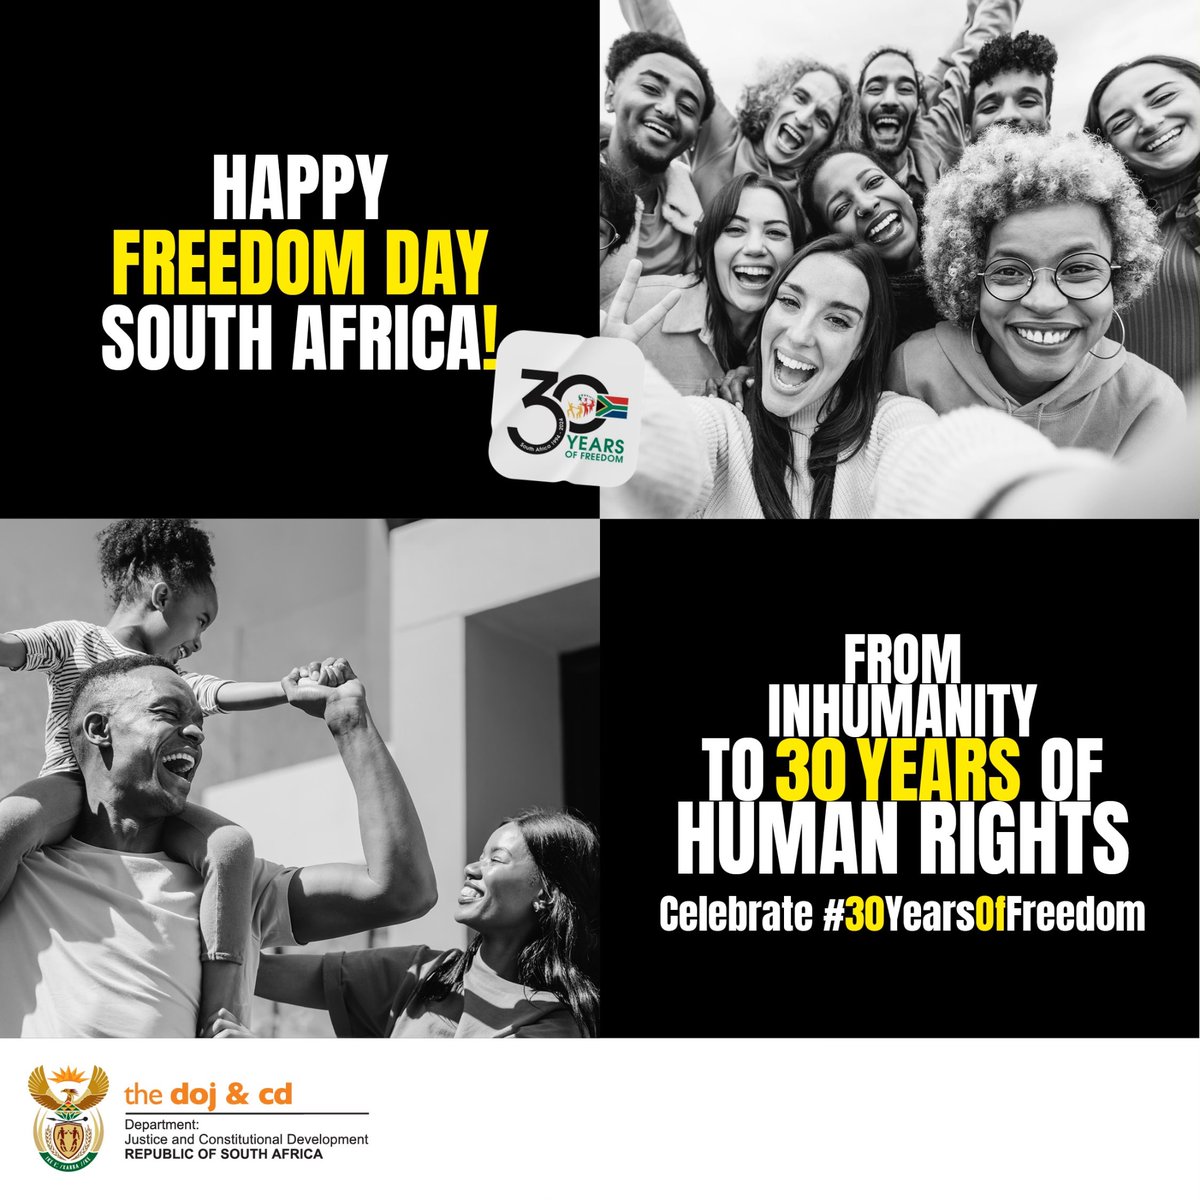 “For to be free is not merely to cast off one's chains, but to live in a way that respects and enhances the freedom of others.” - Nelson Mandela #Celebrate30YearsOfFreedom #FreedomDay ✊🏽